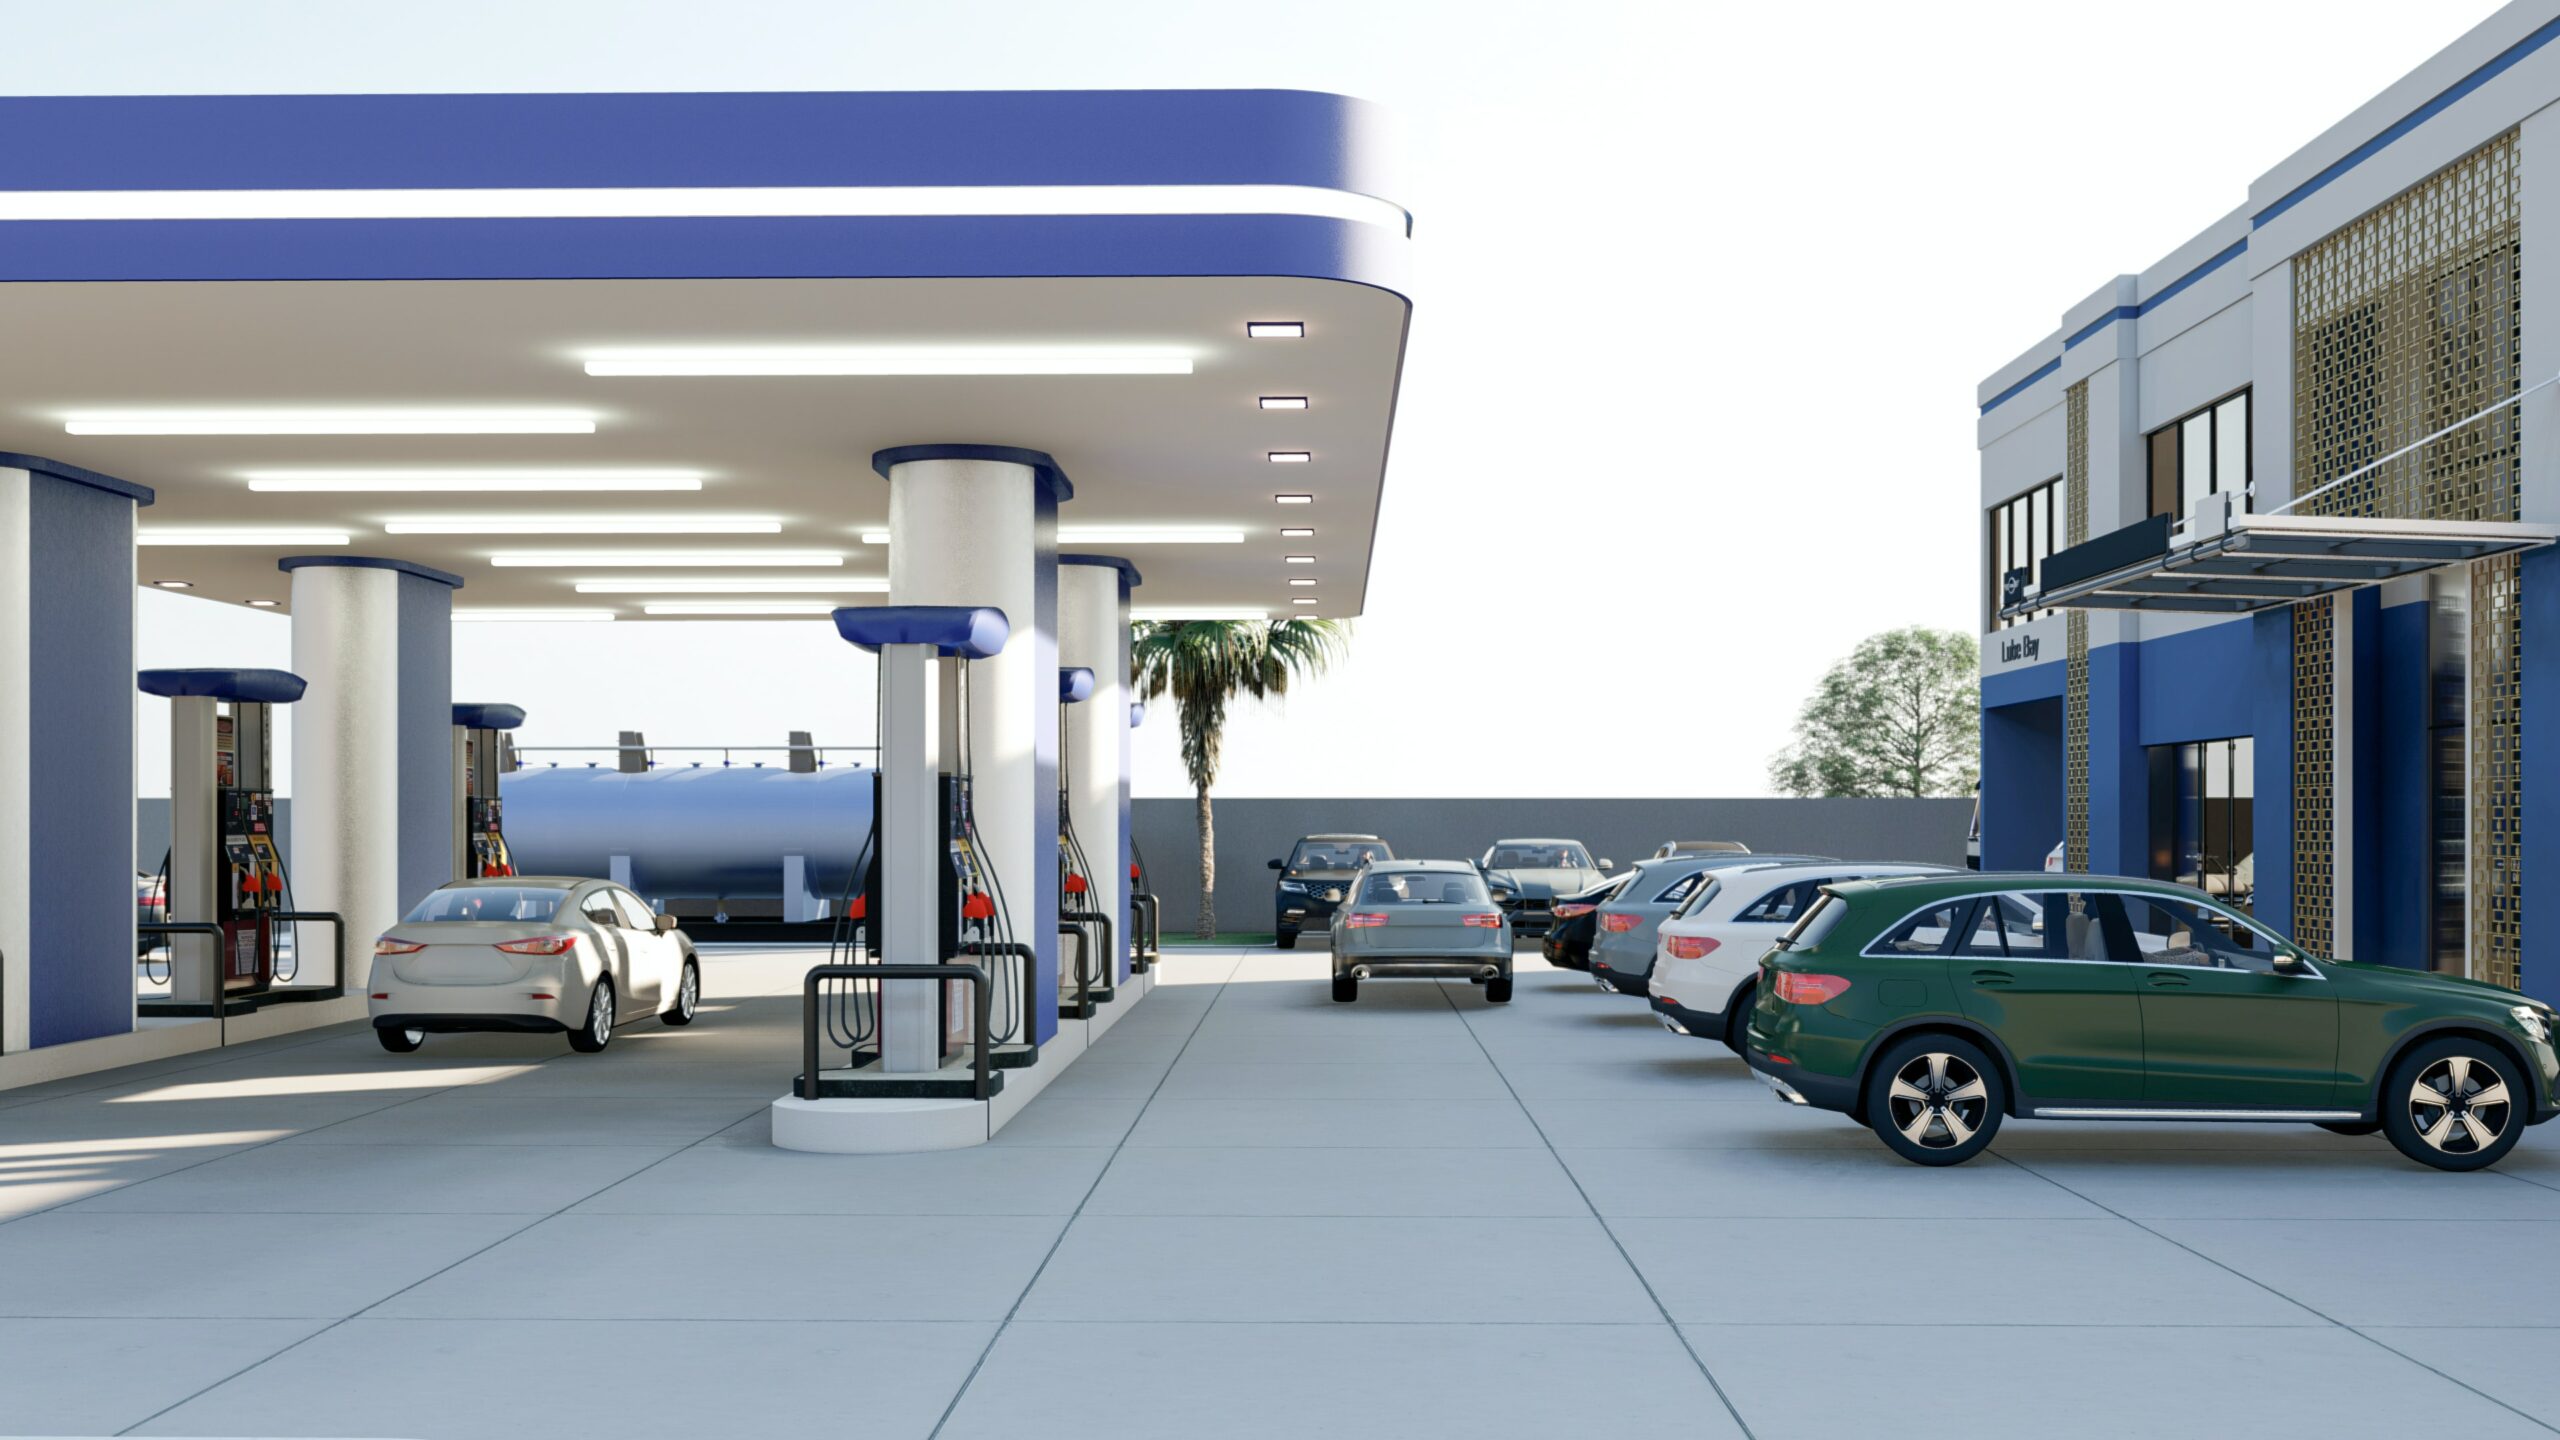 MEMBER NEWS: Verlume Blog – Remote Power: The Offshore Filling Stations of the Future